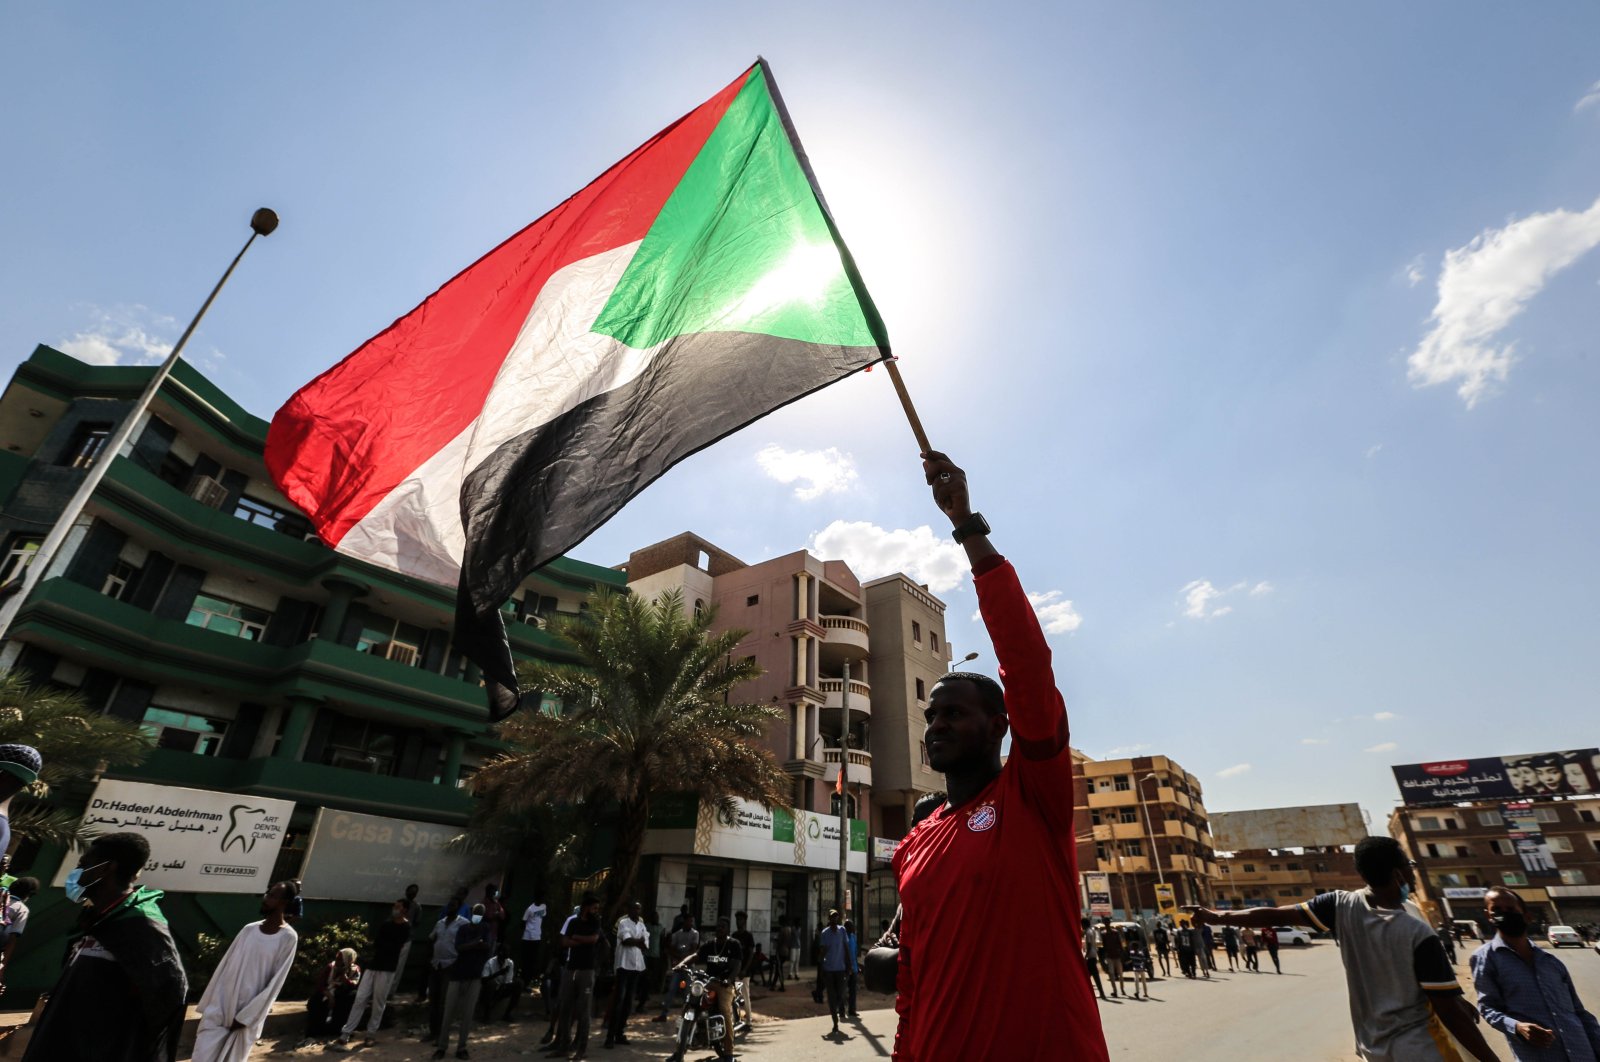 A Sudanese protestor waves a national flag as people gather in a rally against the military coup, in the capital Khartoum, Sudan, Oct. 30, 2021. (AA Photo)